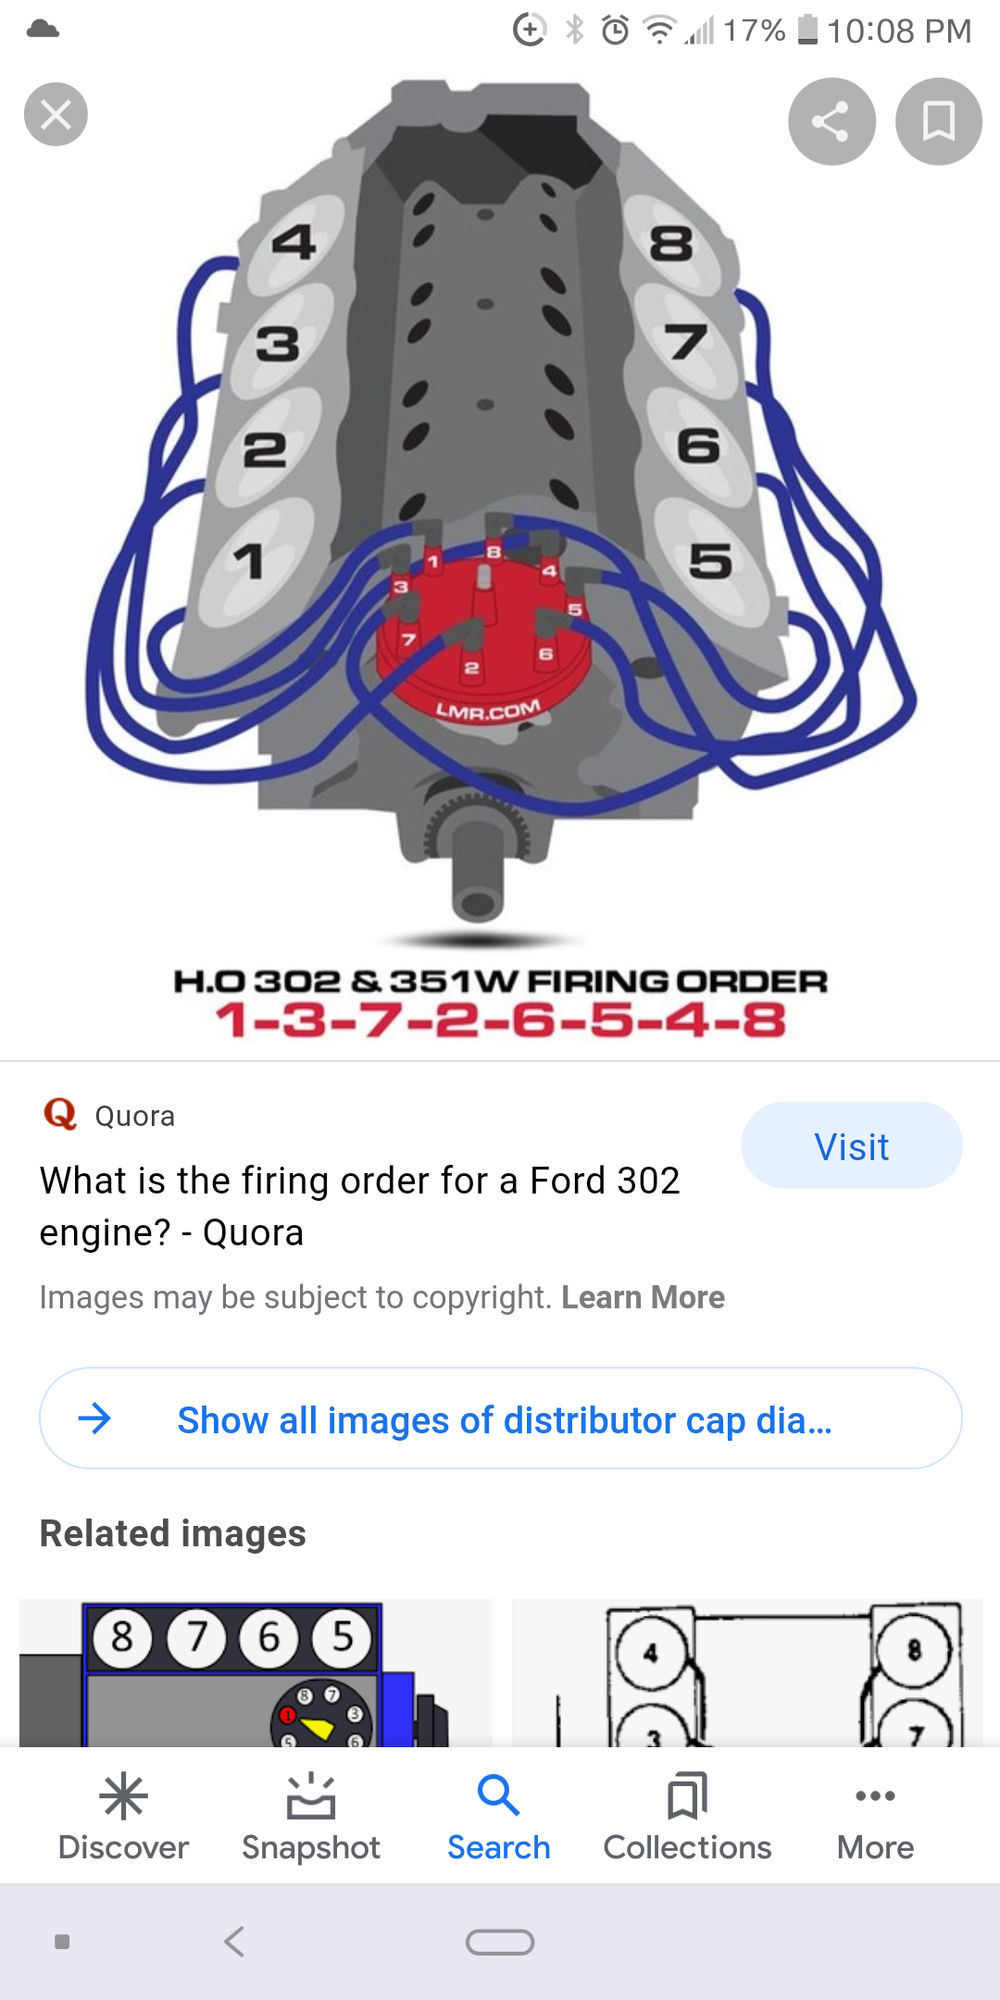 Distributor cap diagram, cant figure it out - Ford Truck Enthusiasts Forums